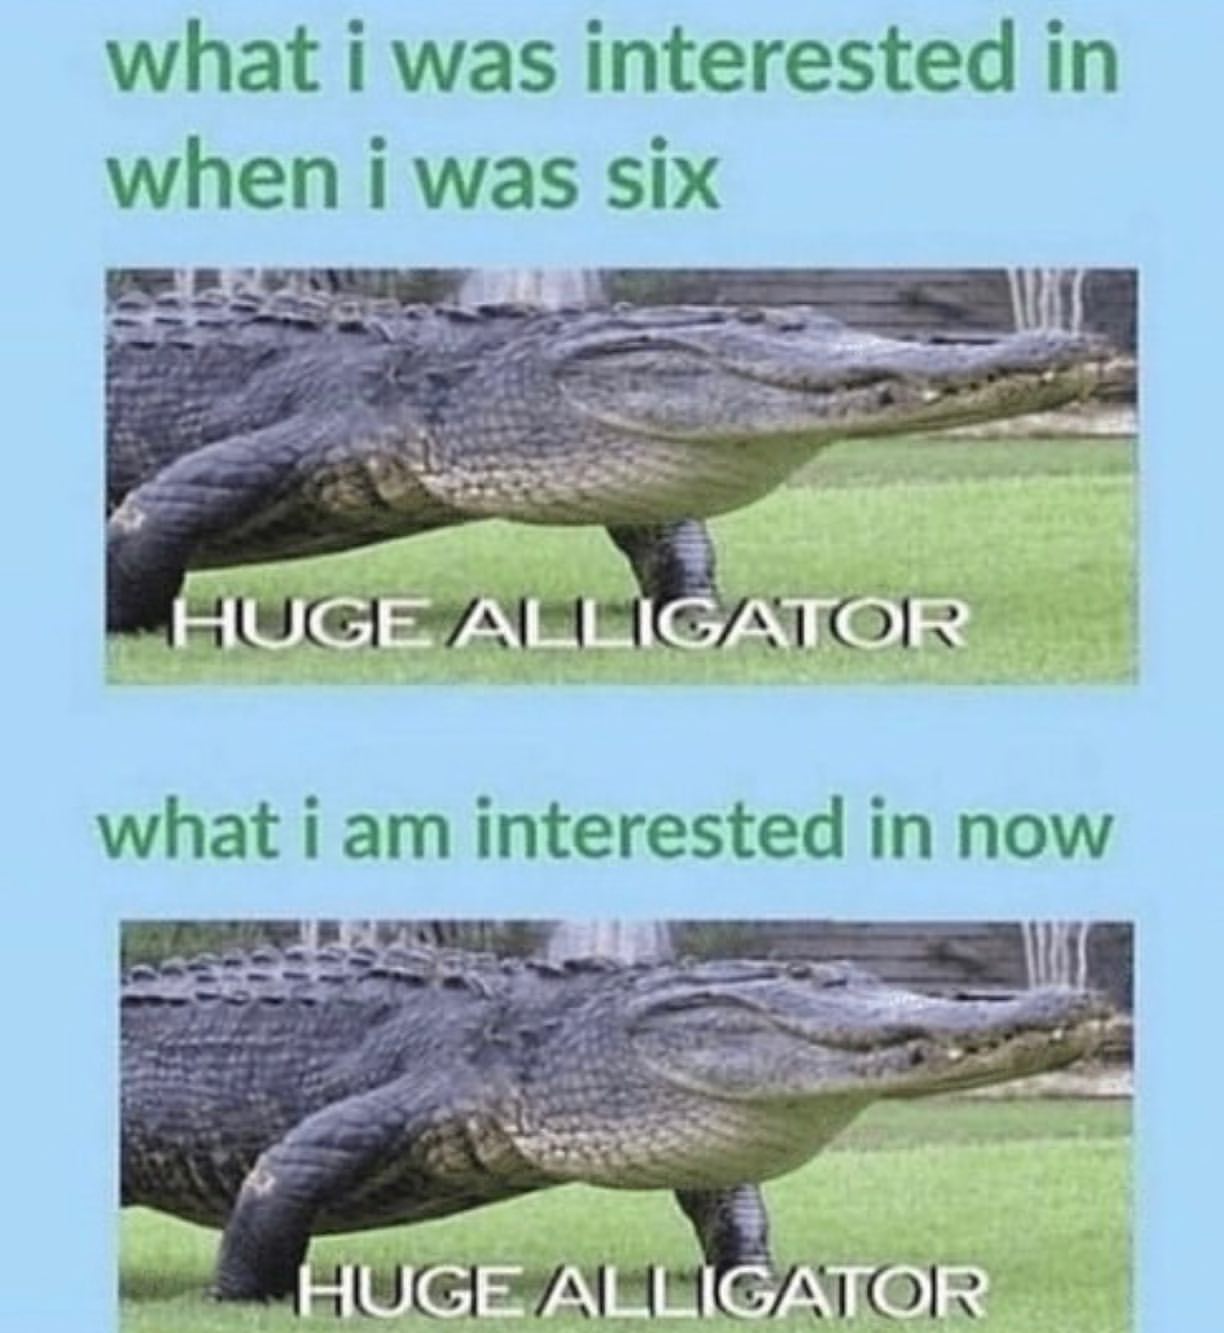 What I was interested in when I was six.  Huge alligator.  What I am interested in now.  Huge alligator.